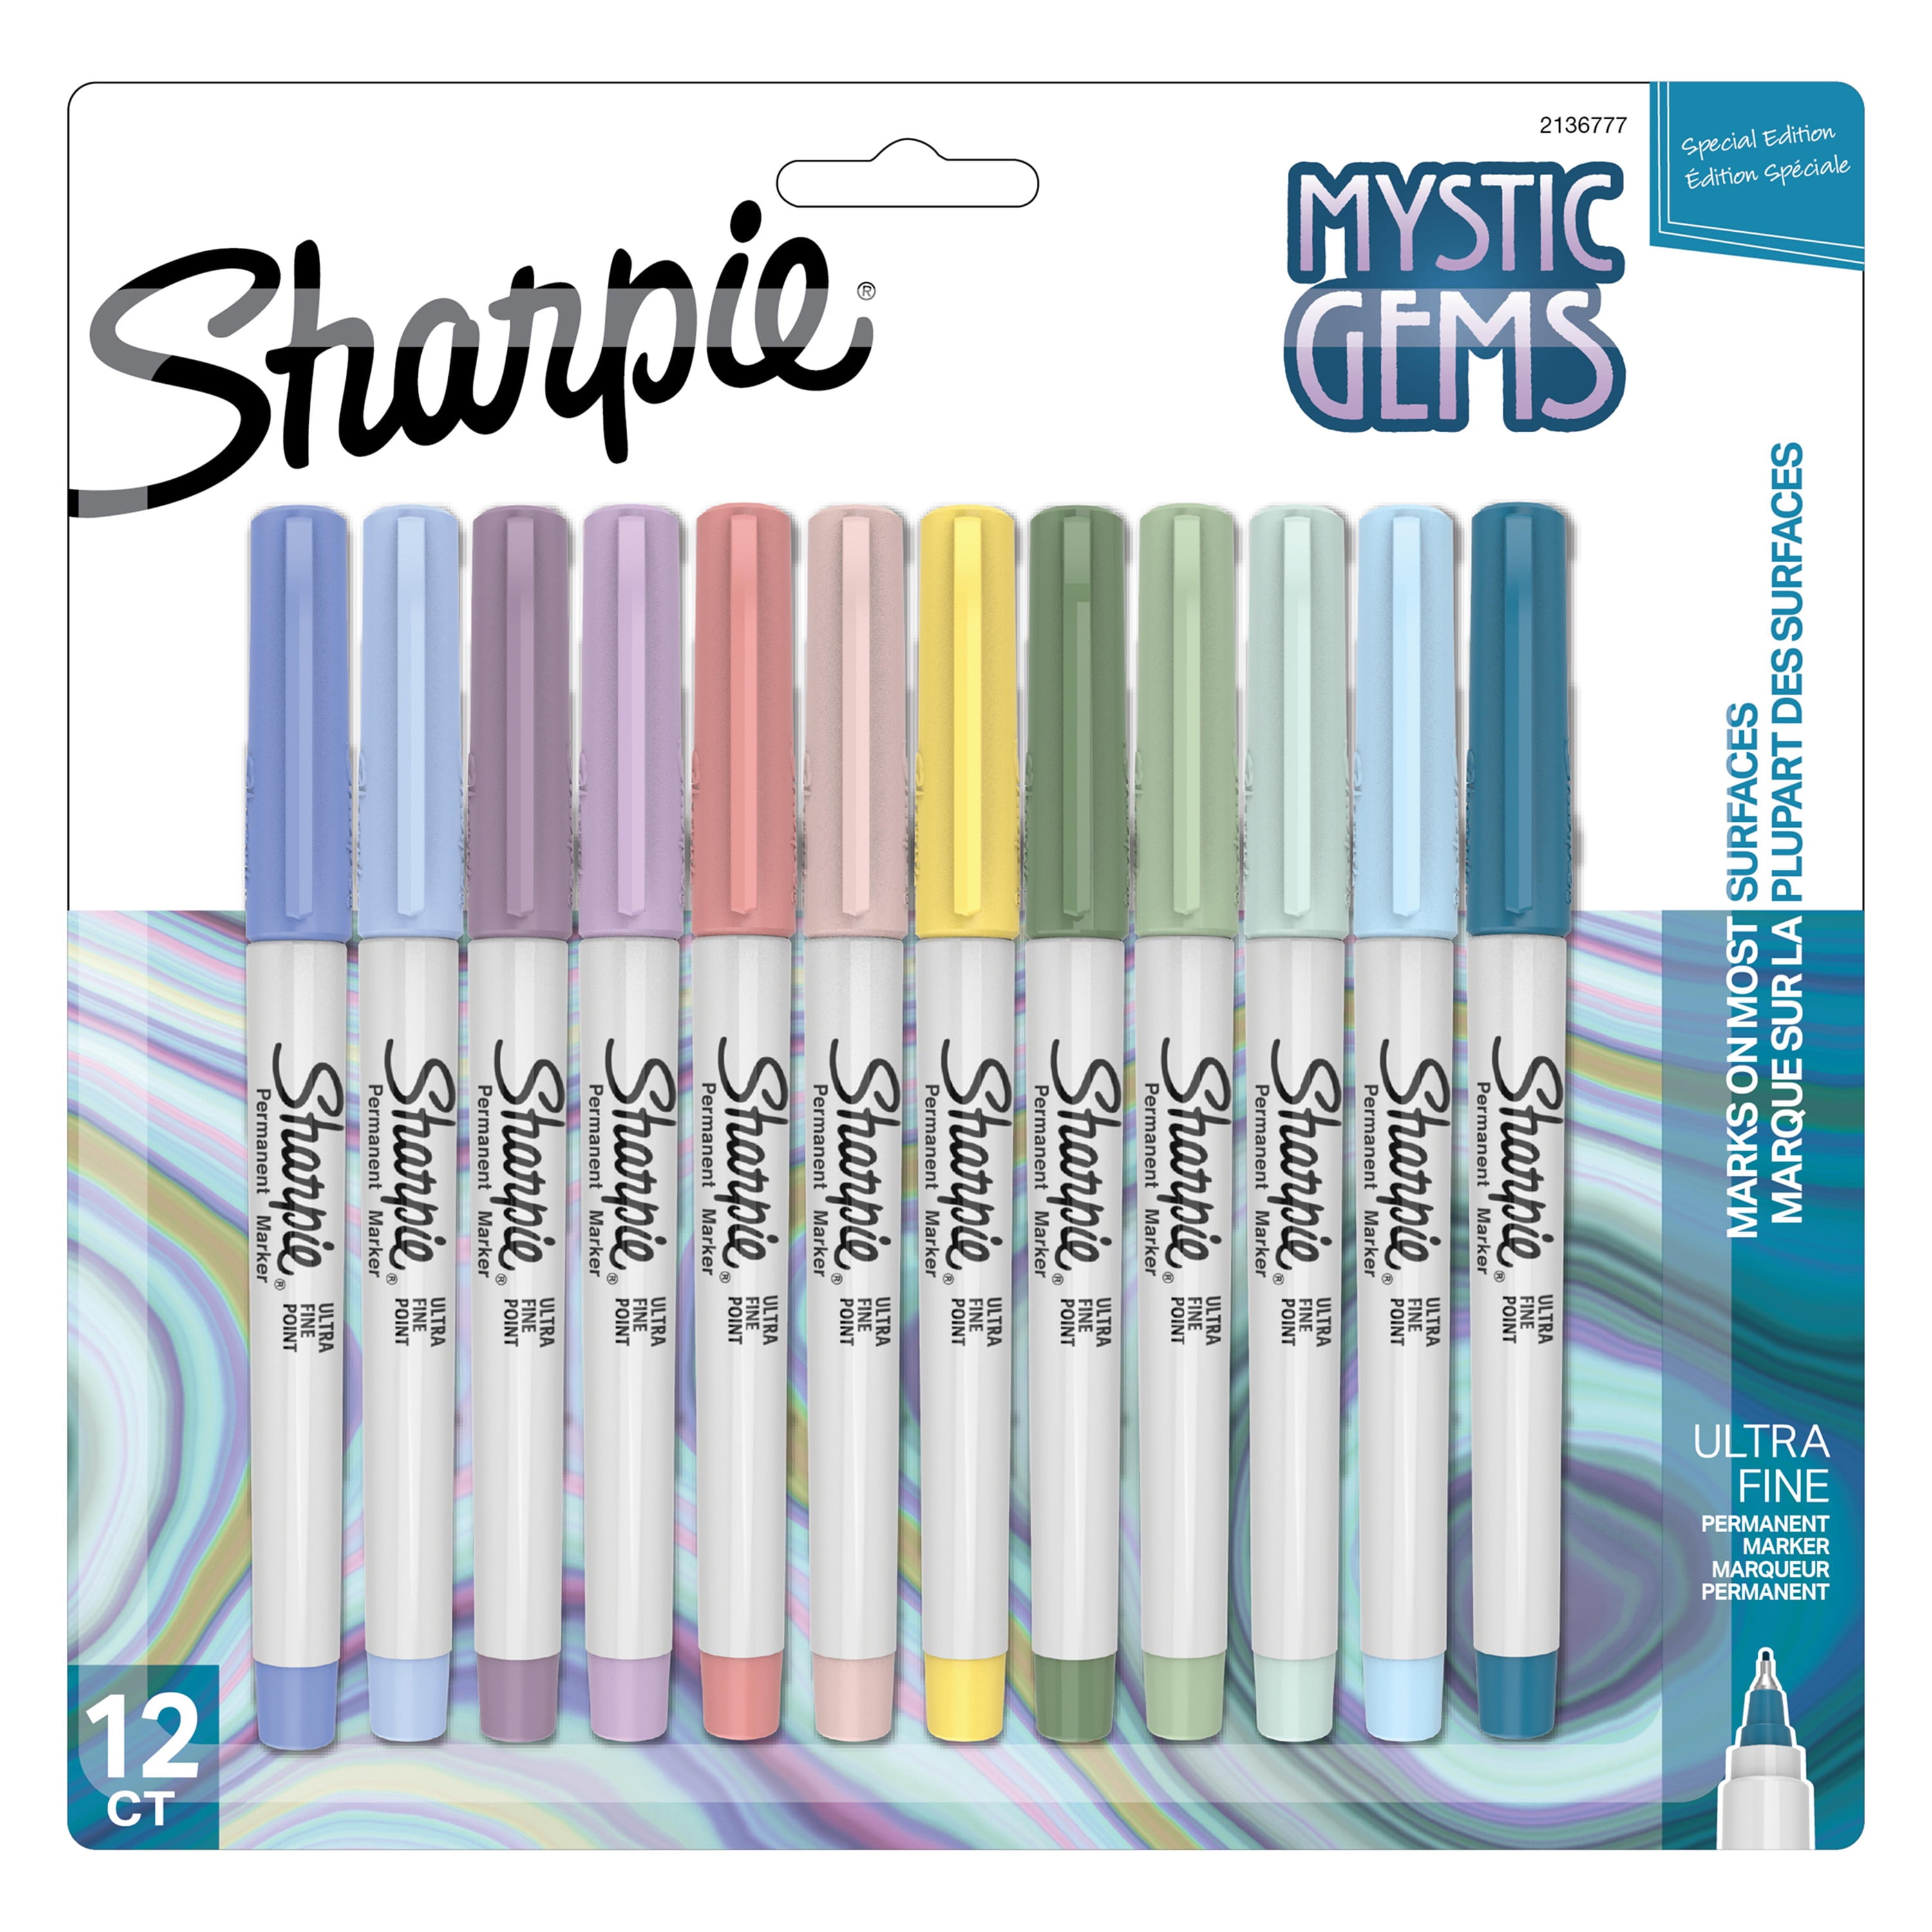 Bazic Silver and Gold Metallic Markers - 2 pack